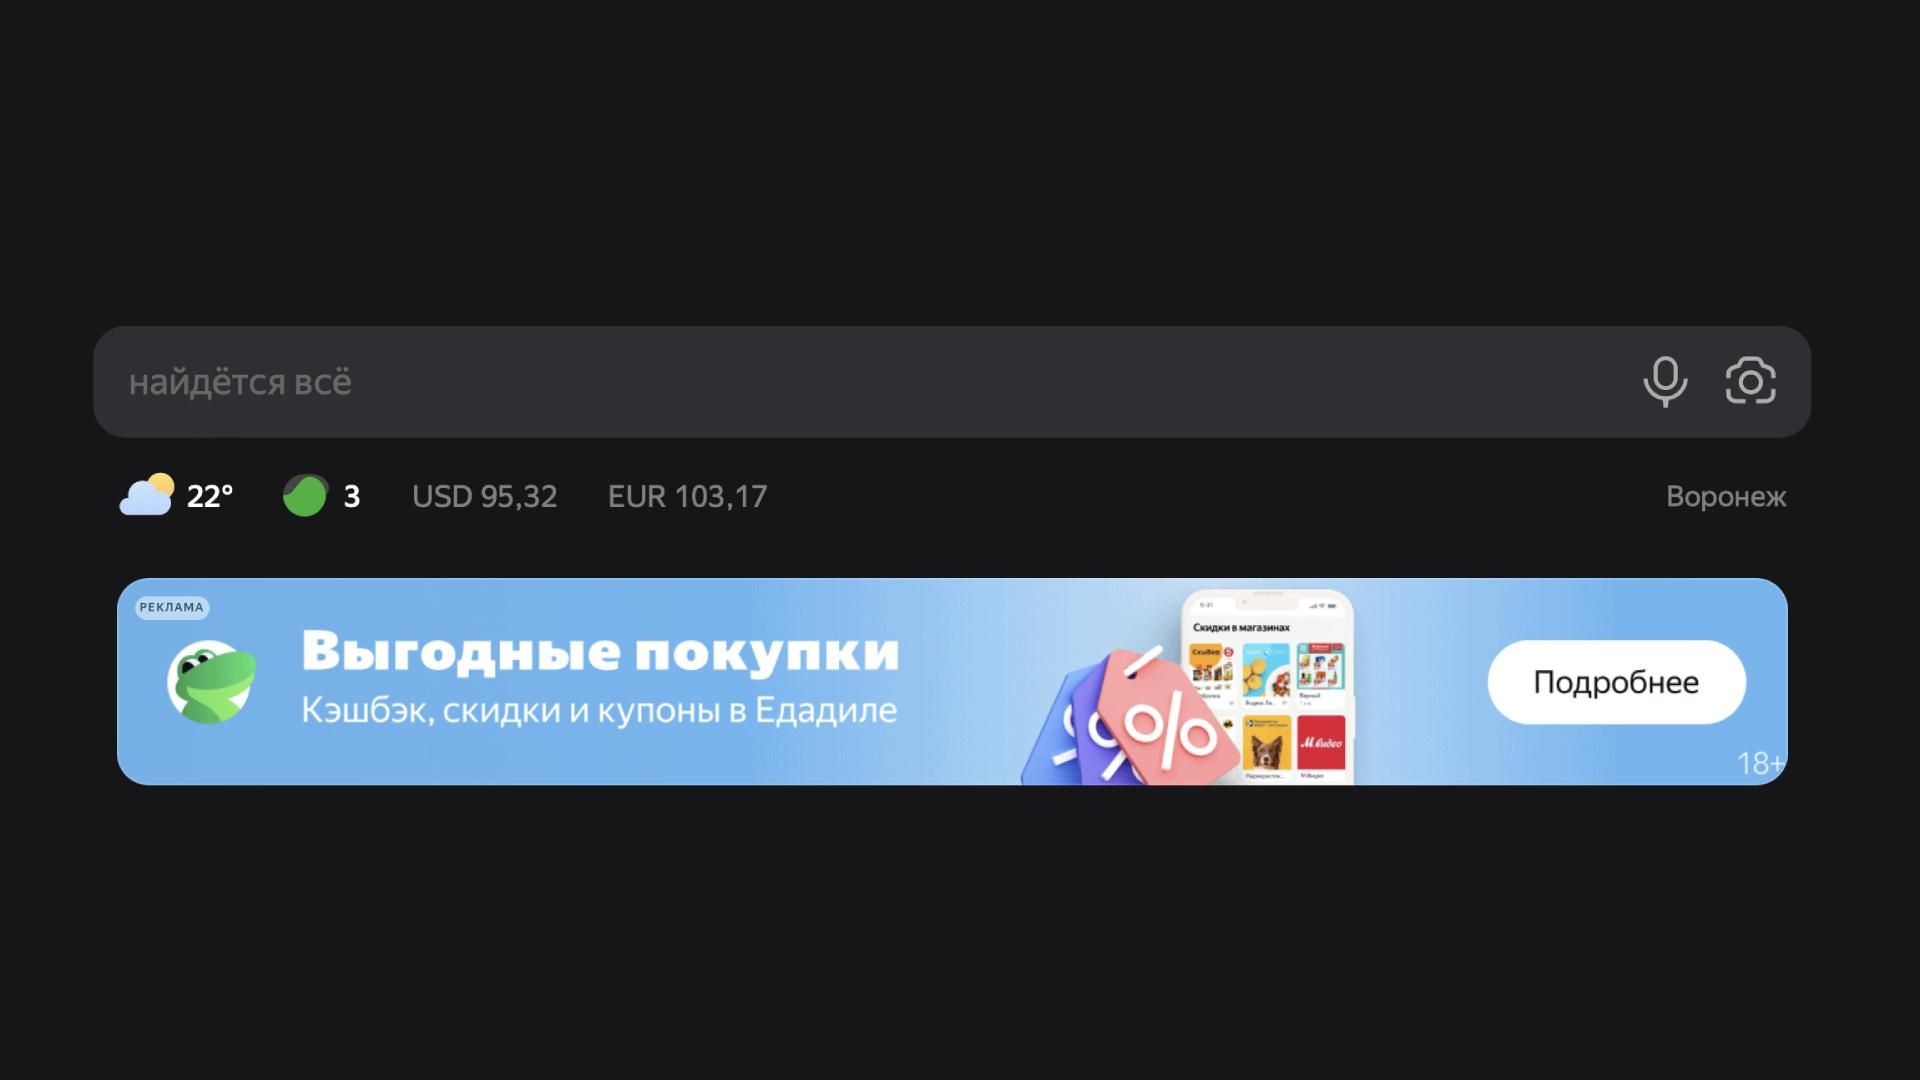 media banner placement under the search bar of the Yandex browser